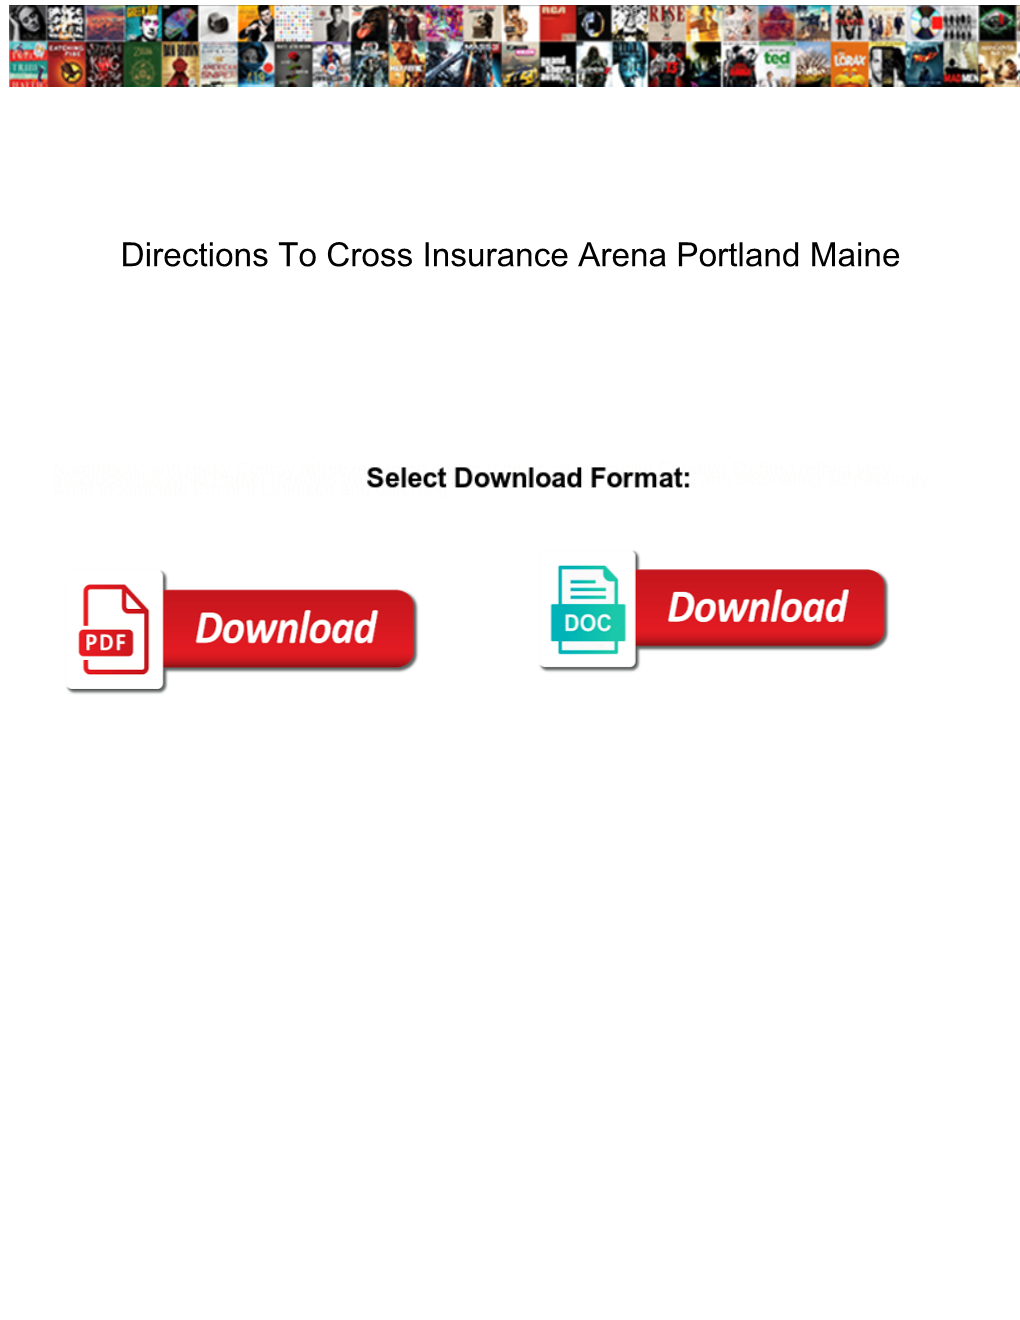 Directions to Cross Insurance Arena Portland Maine